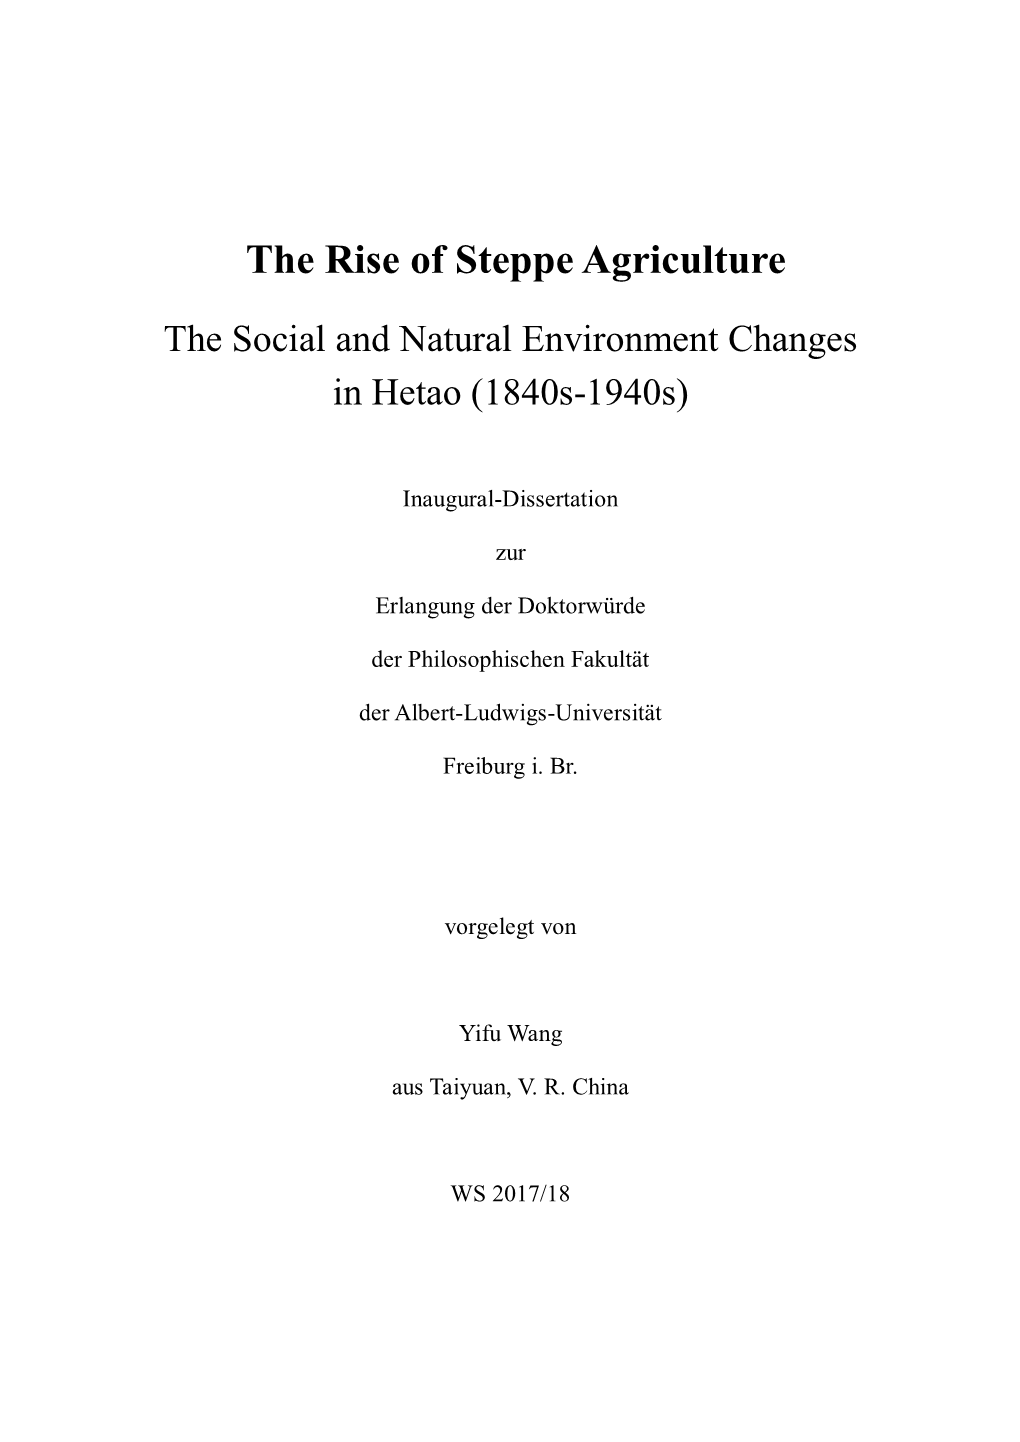 The Rise of Steppe Agriculture